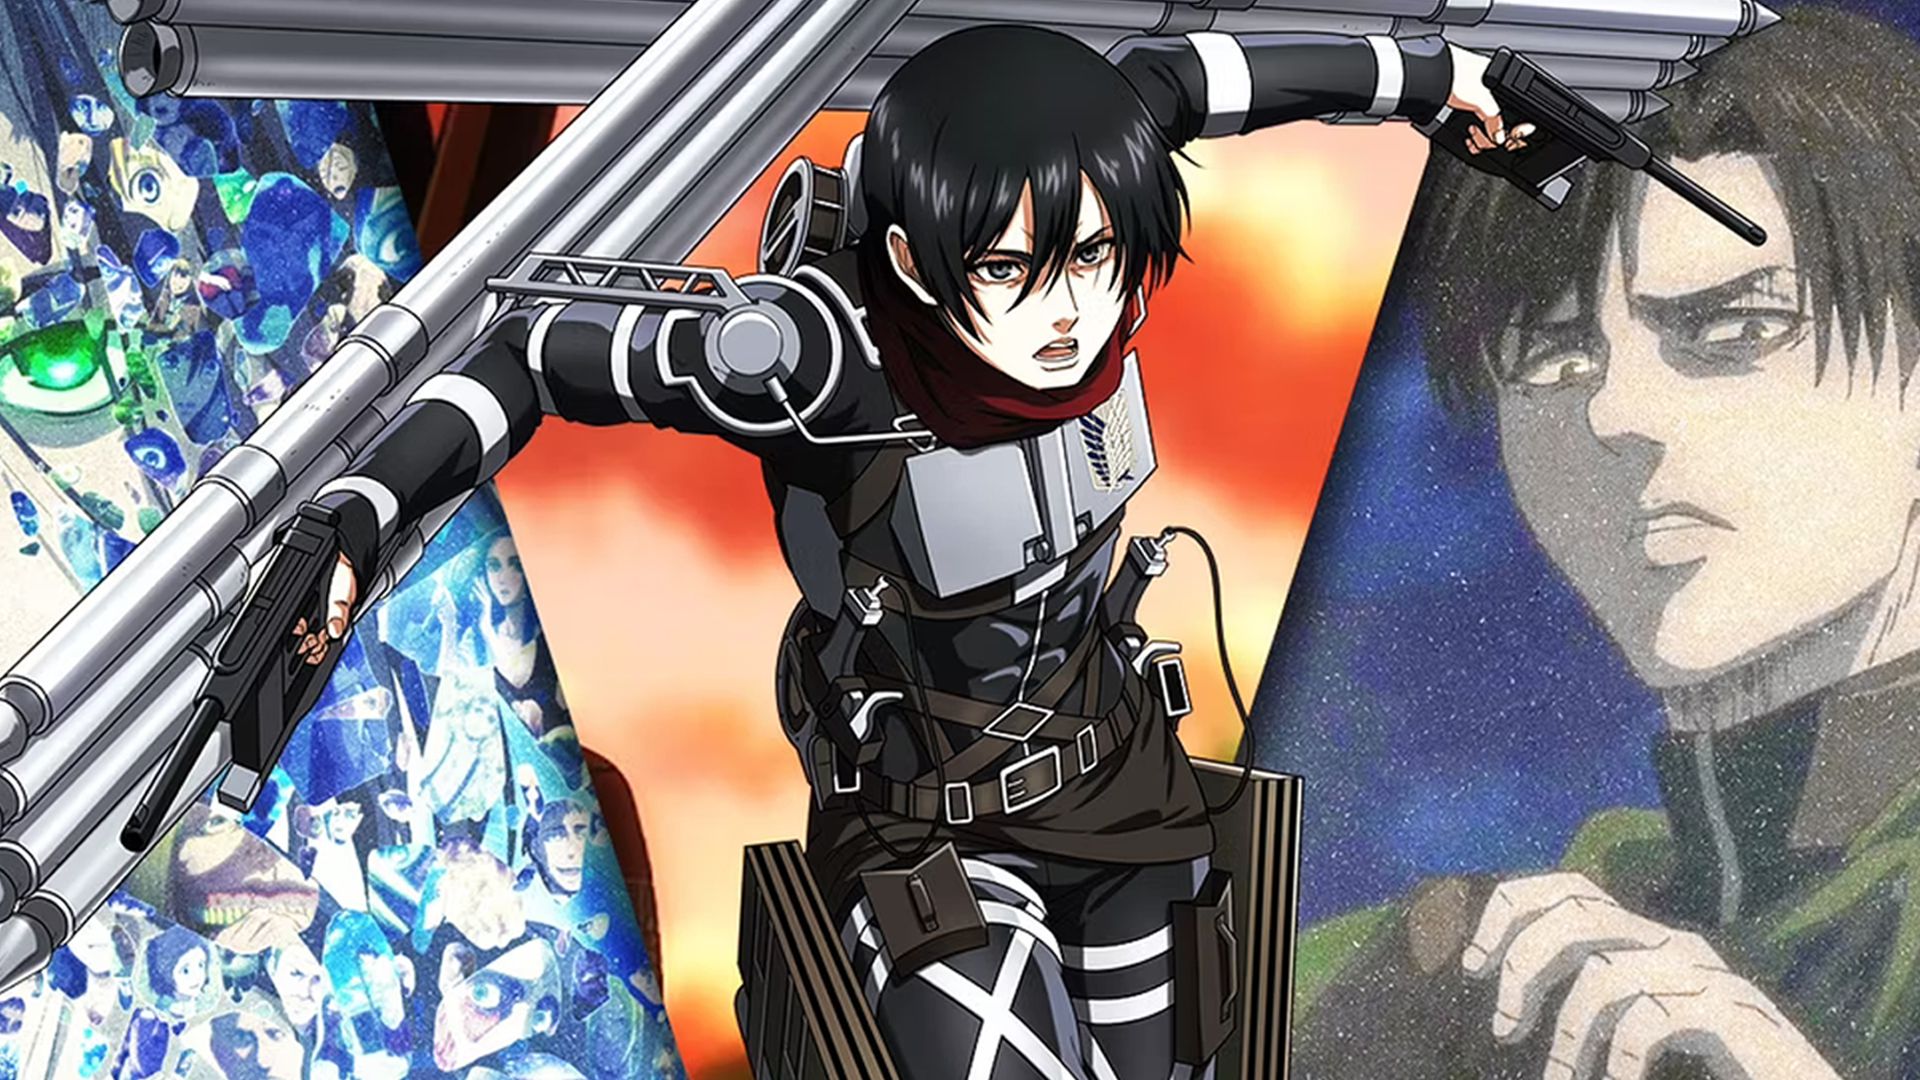 Custom Image of Attack on Titan Characters with Mikasa in the center